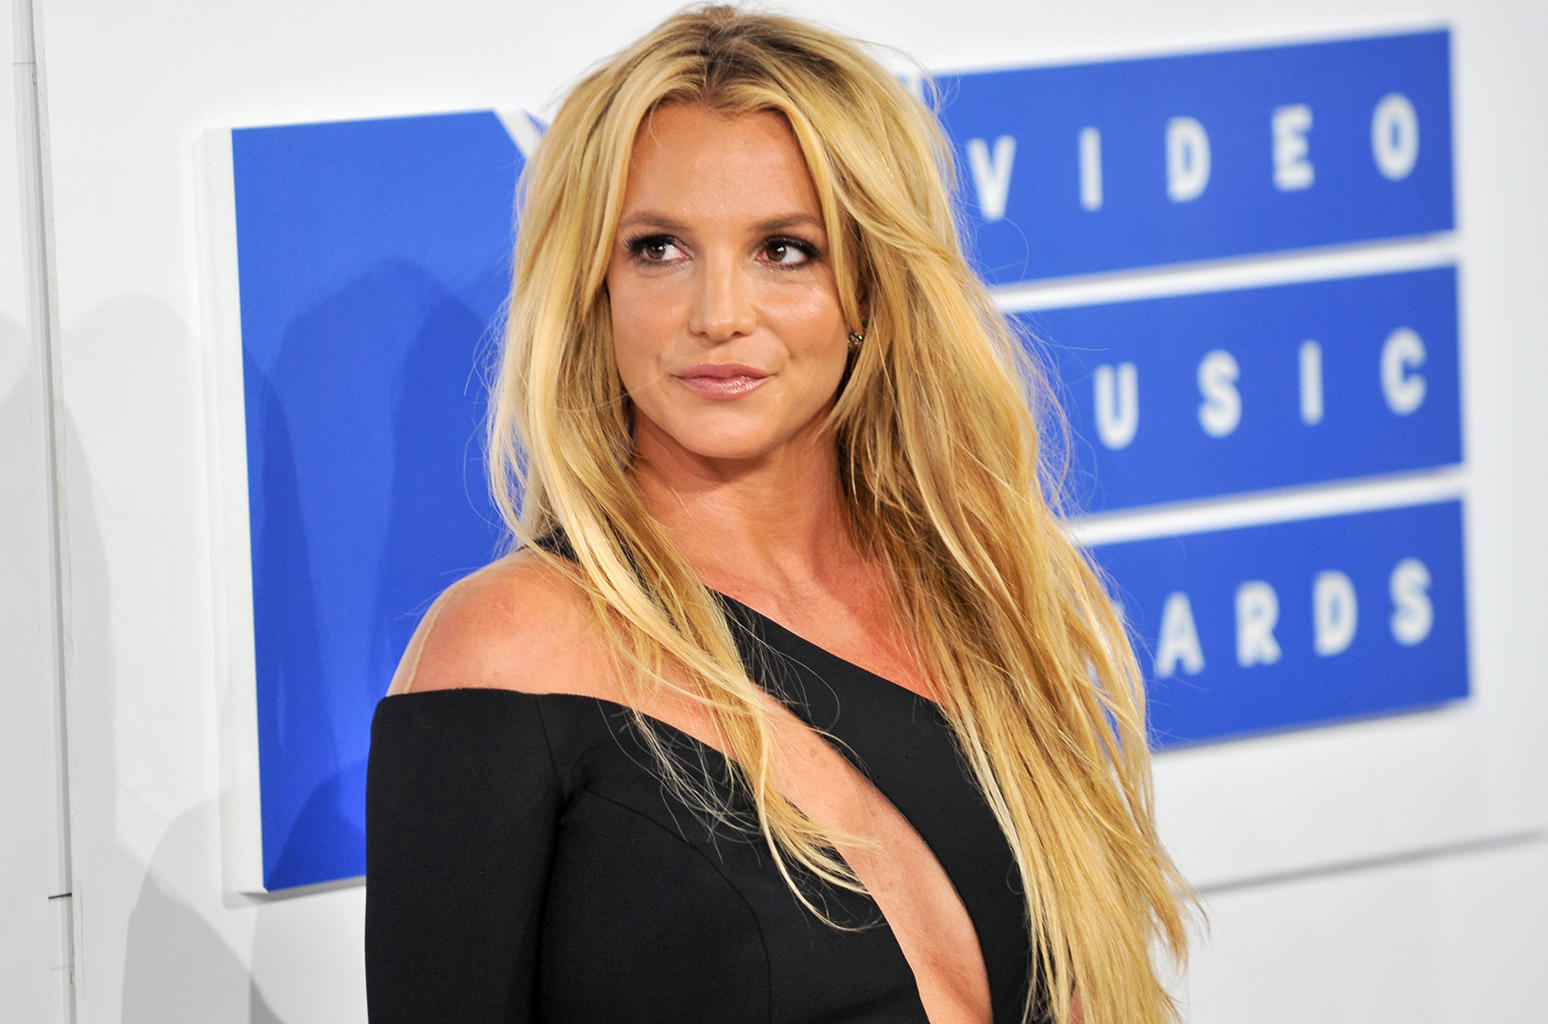 Britney fans raging comeback song with John leaked online